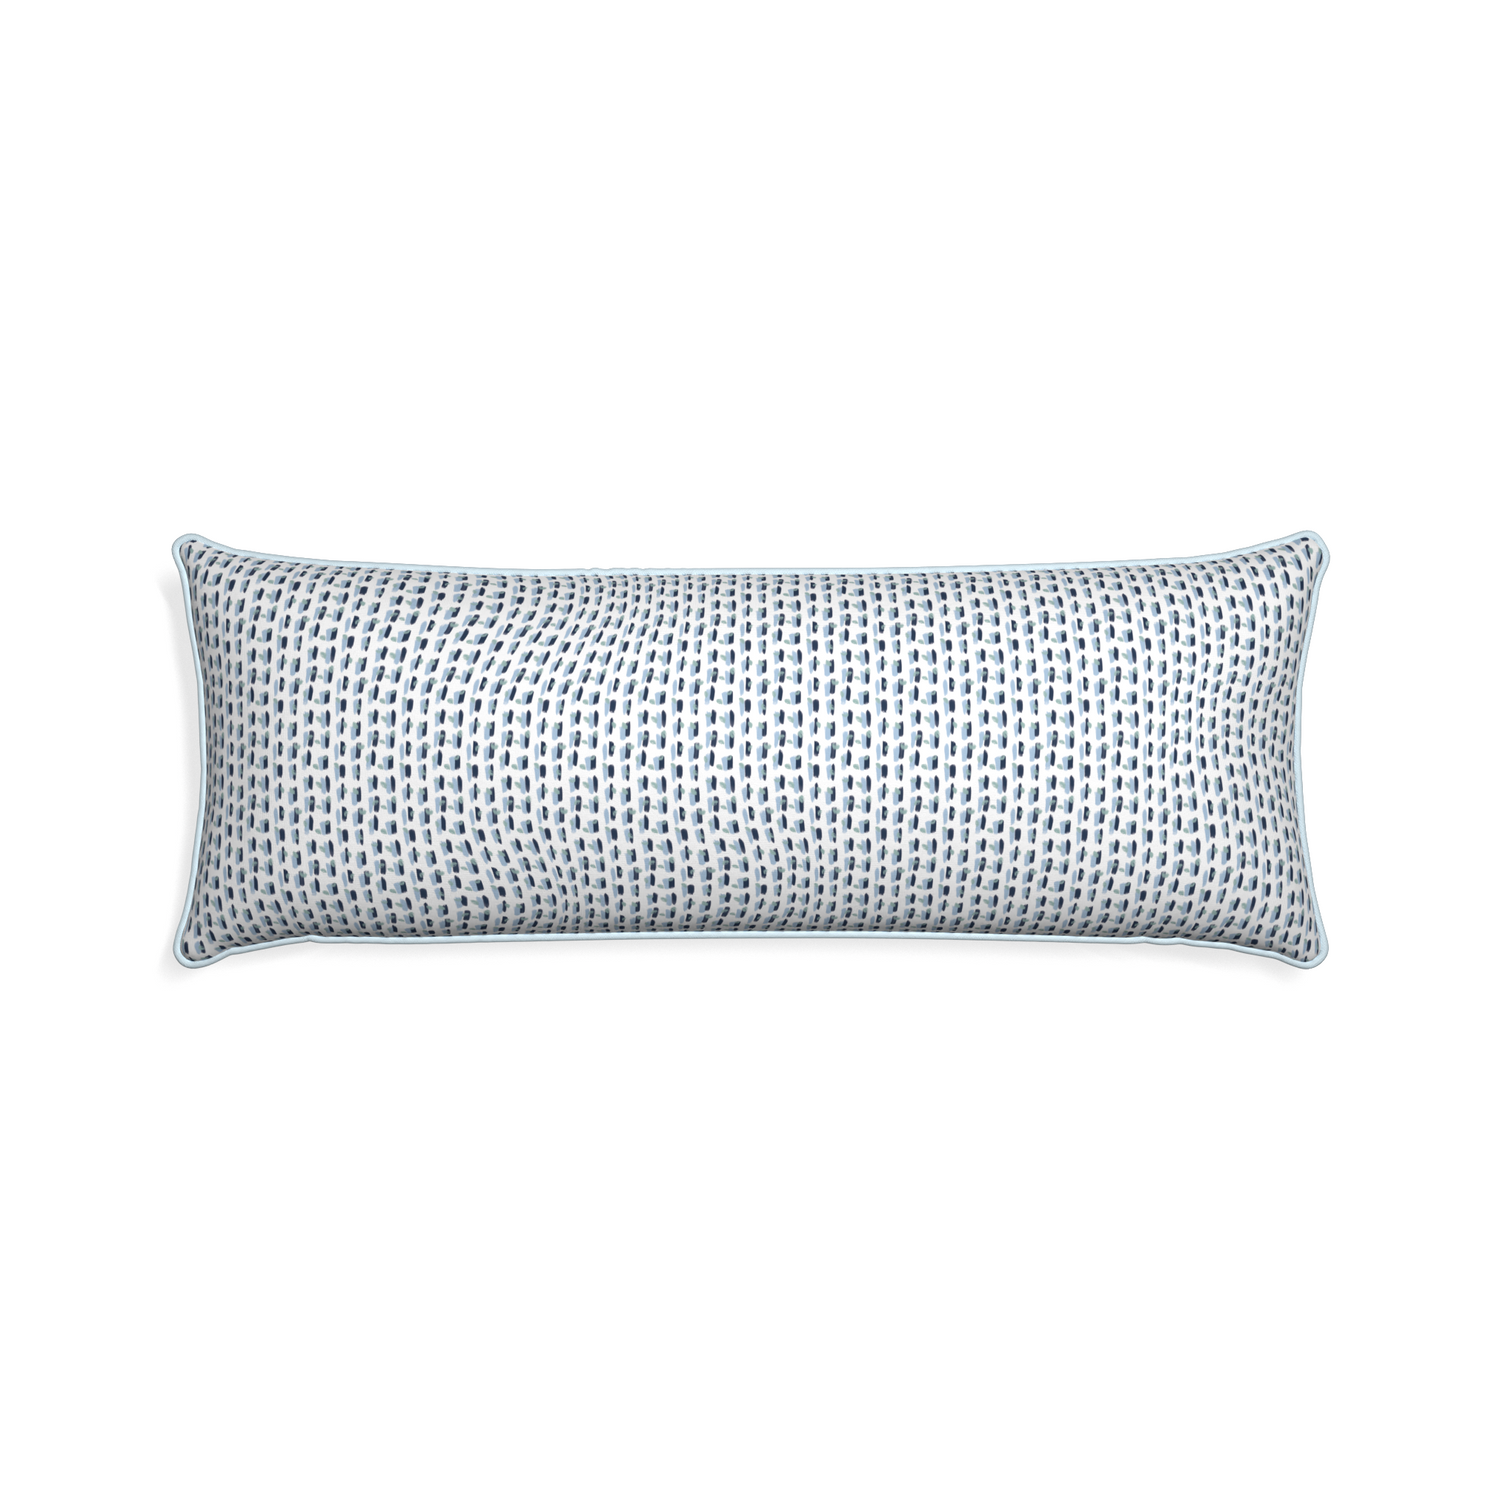 Xl-lumbar poppy blue custom pillow with powder piping on white background